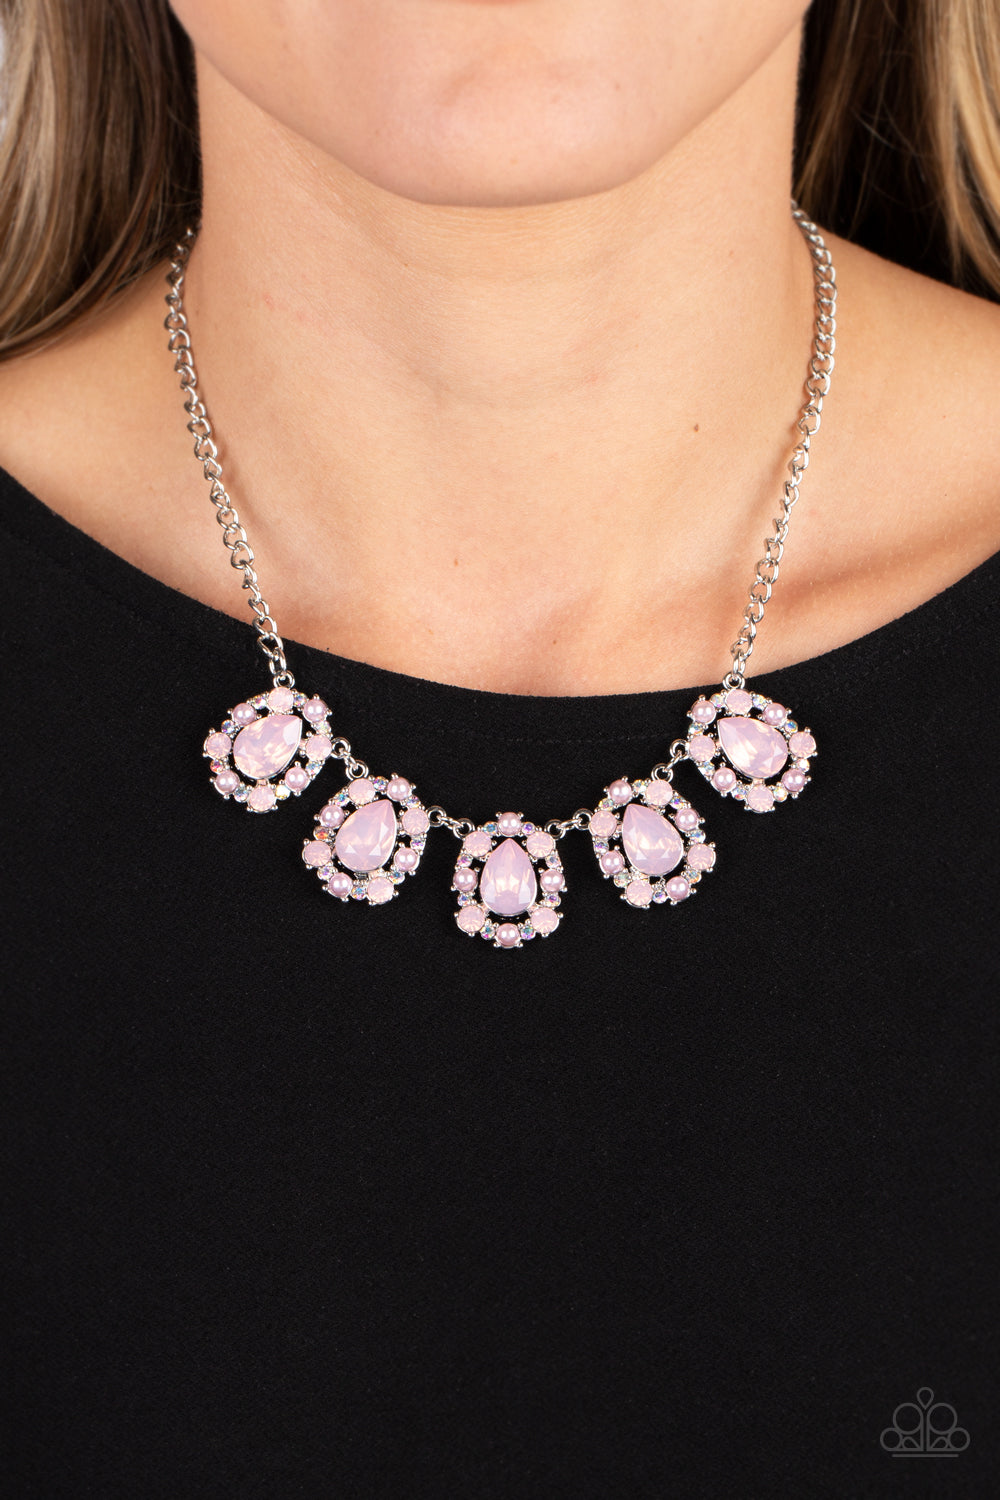 Paparazzi “Pearly Pond” Pink Necklace Earring Set